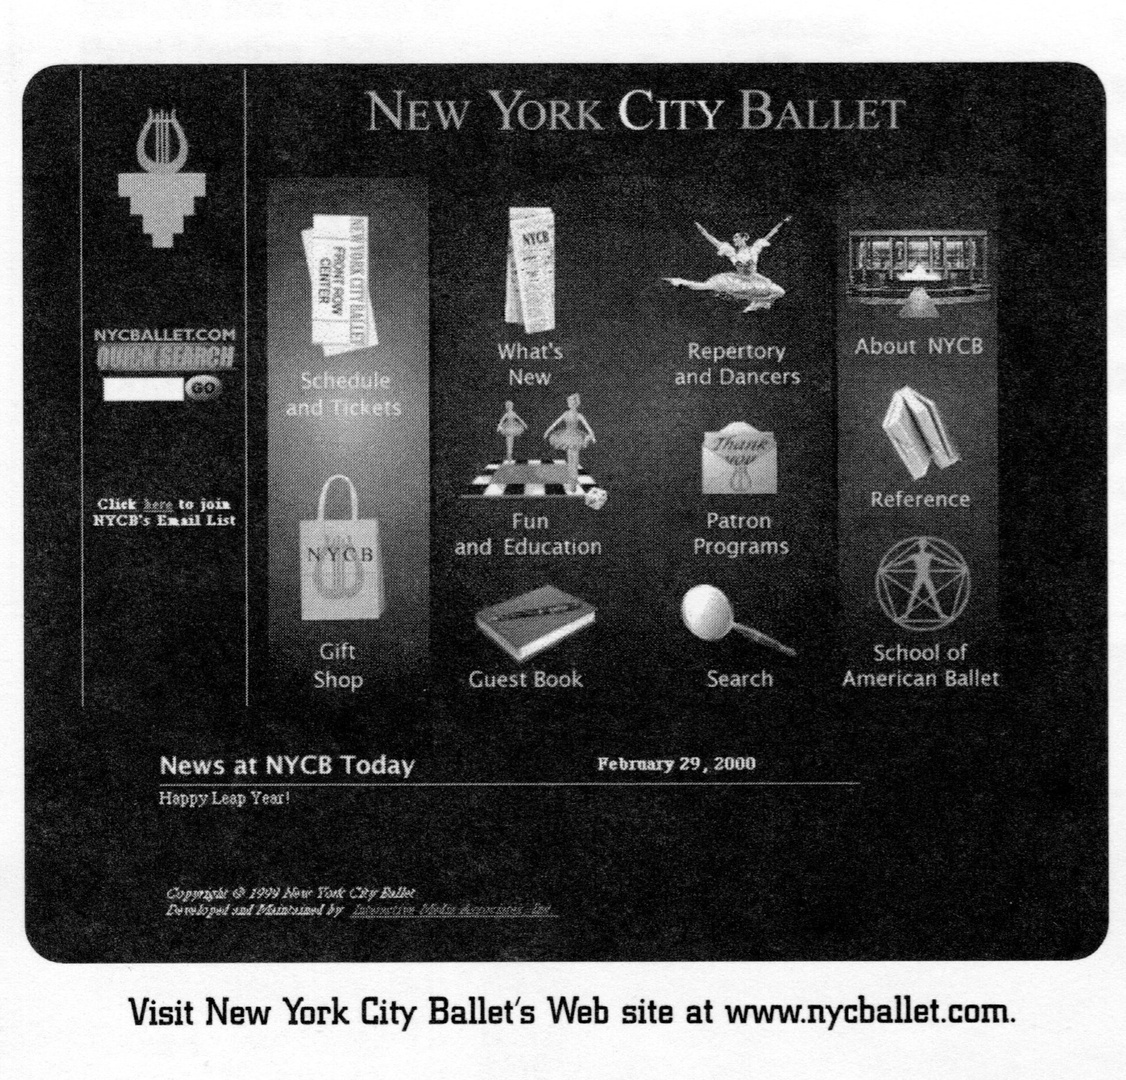 #FBF Our website has come a long way since Y2K, but you can still find us at nycballet.com

Scanned from a feature in an NYCB newsletter from the 2000 Spring Season.